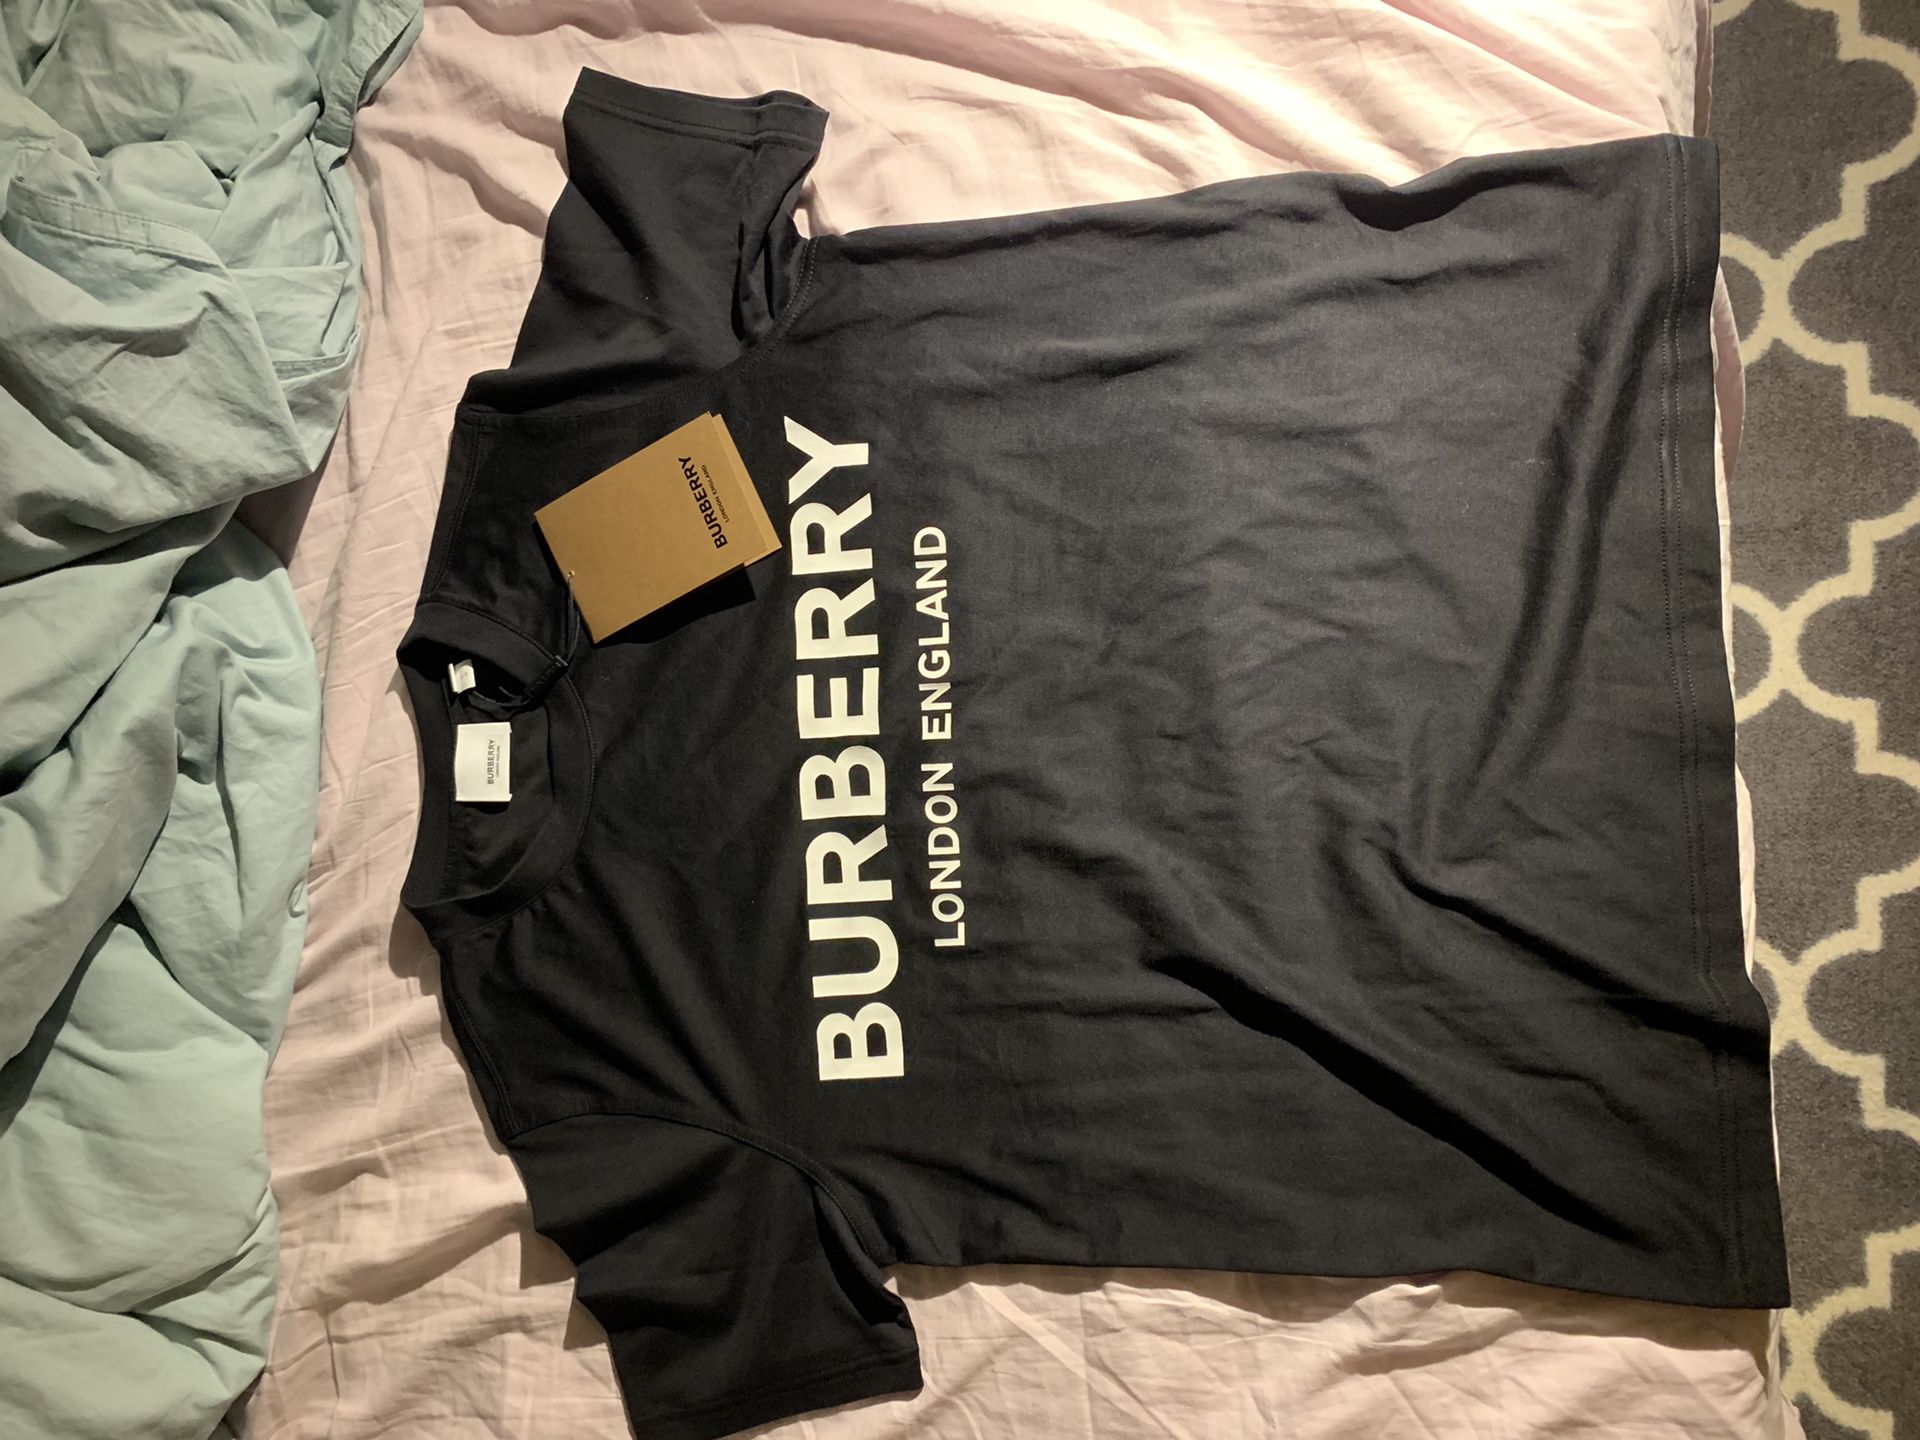 Burberry logo tee size S brand new with tags